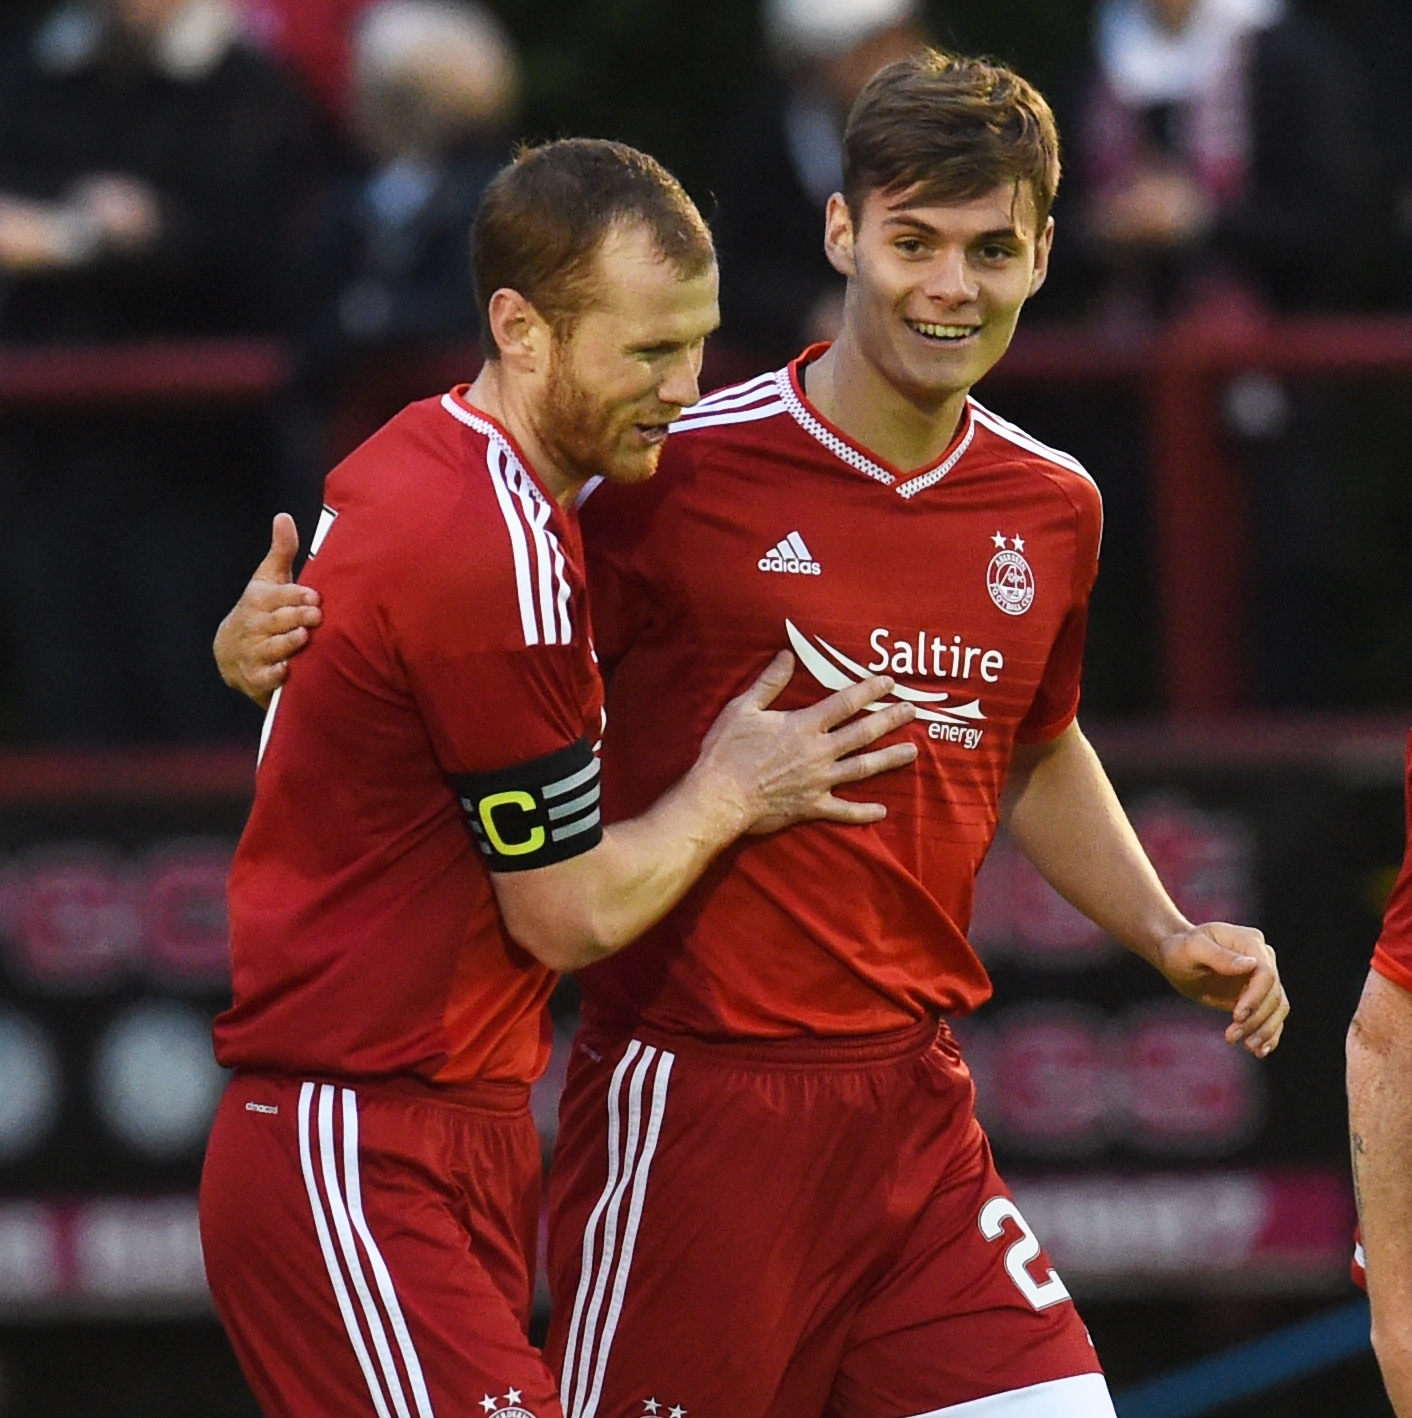 Michael Rose celebrates his goal with team-mate Mark Reynolds